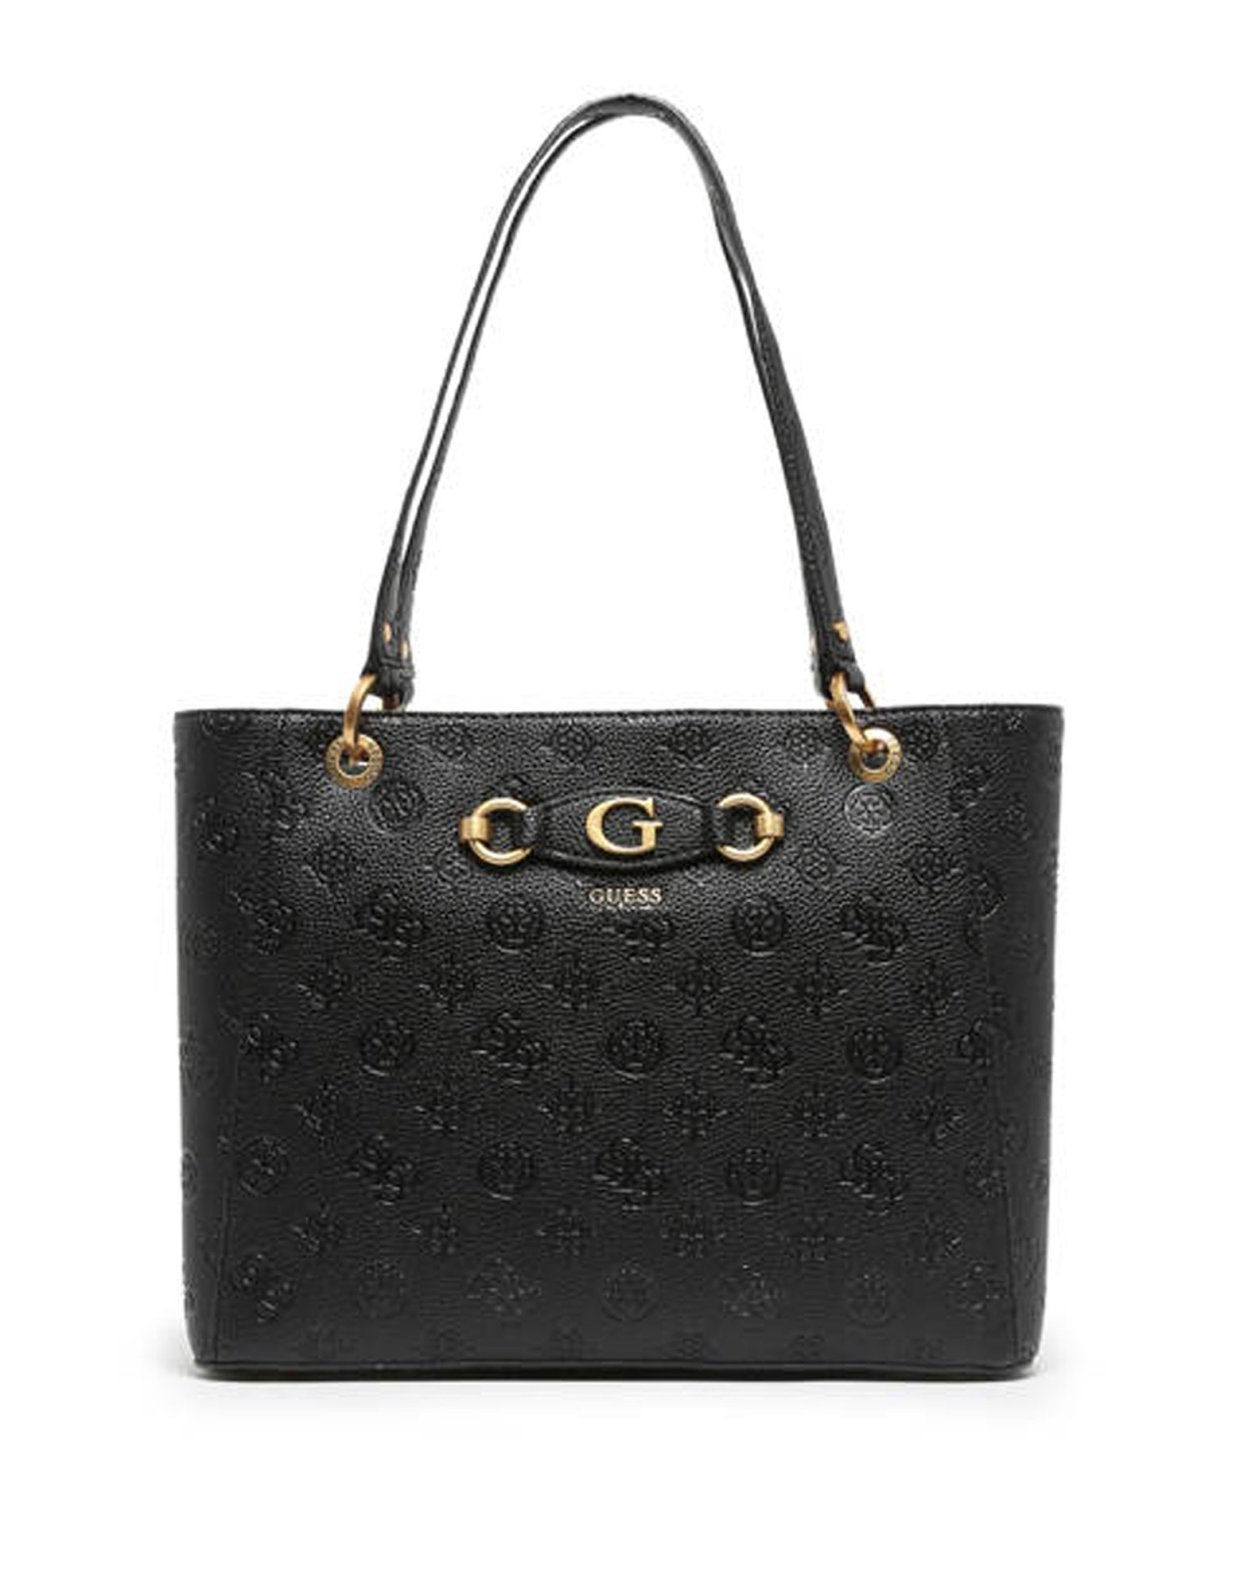 Guess Izzy peony tote bag black